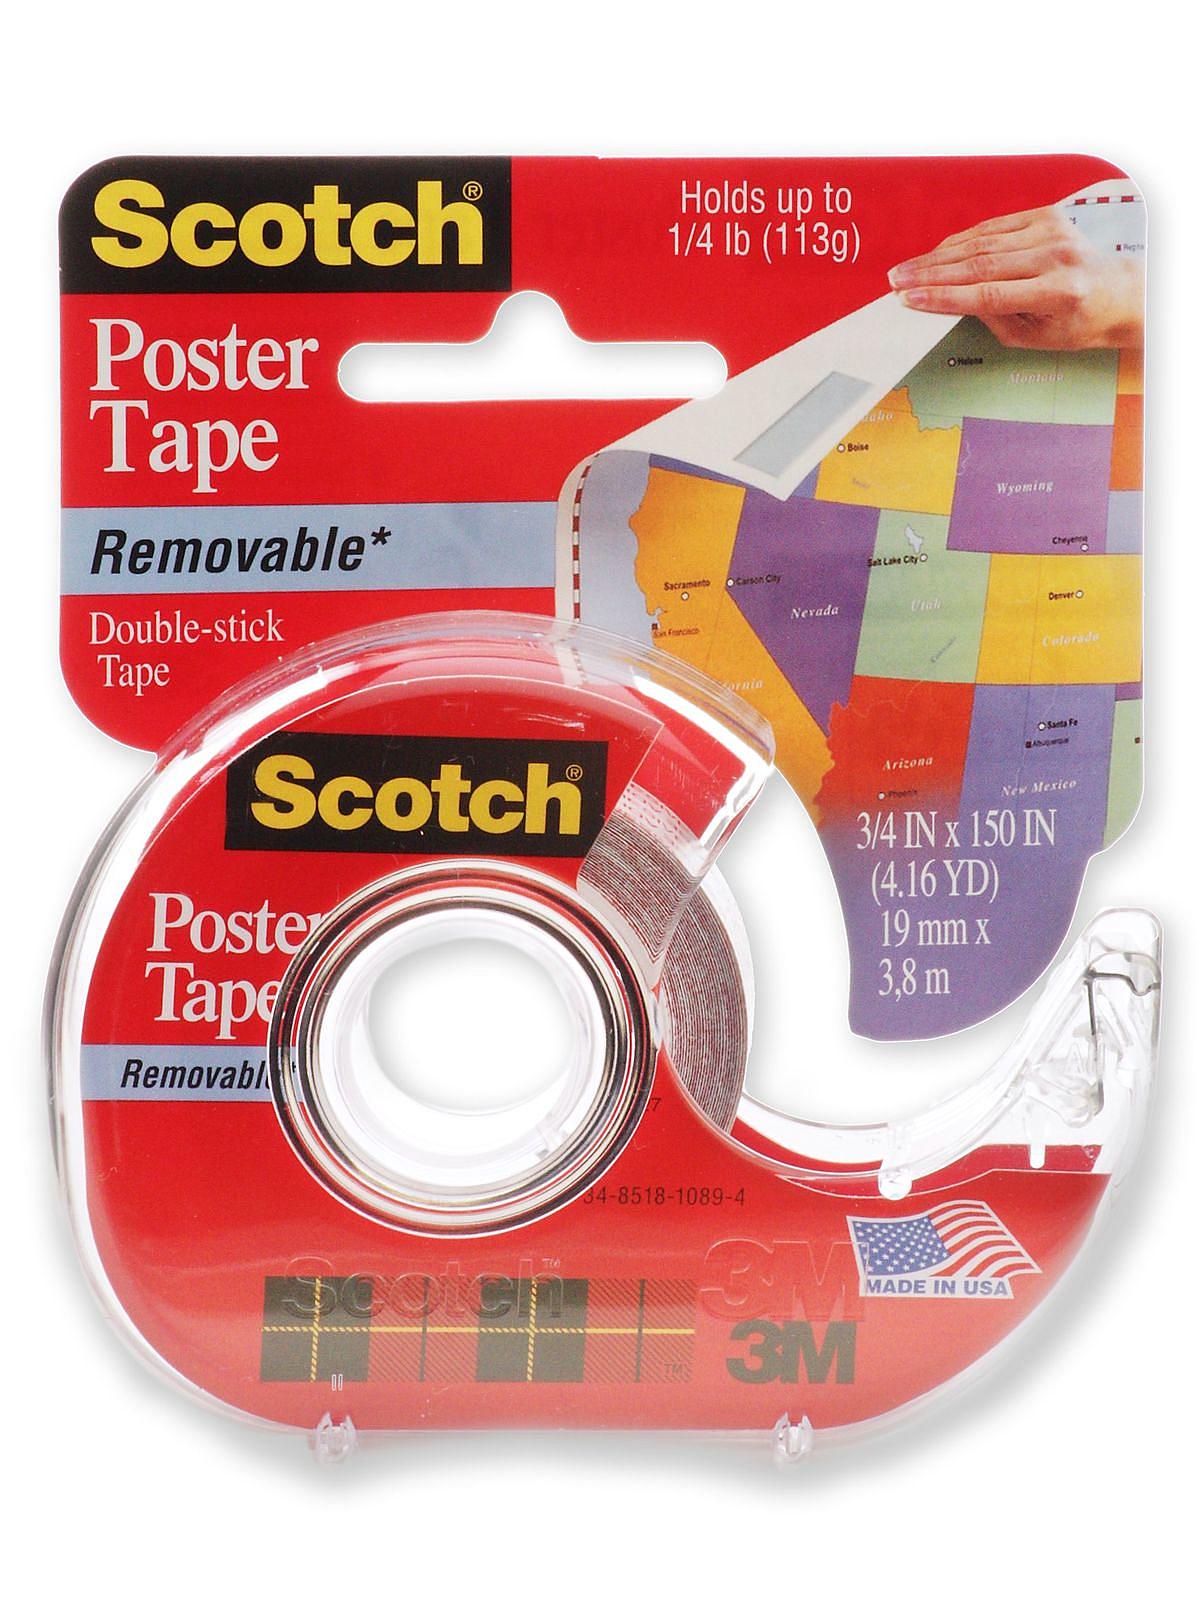 Scotch Poster Tape Removable 3 4 In. X 150 In. Roll 109